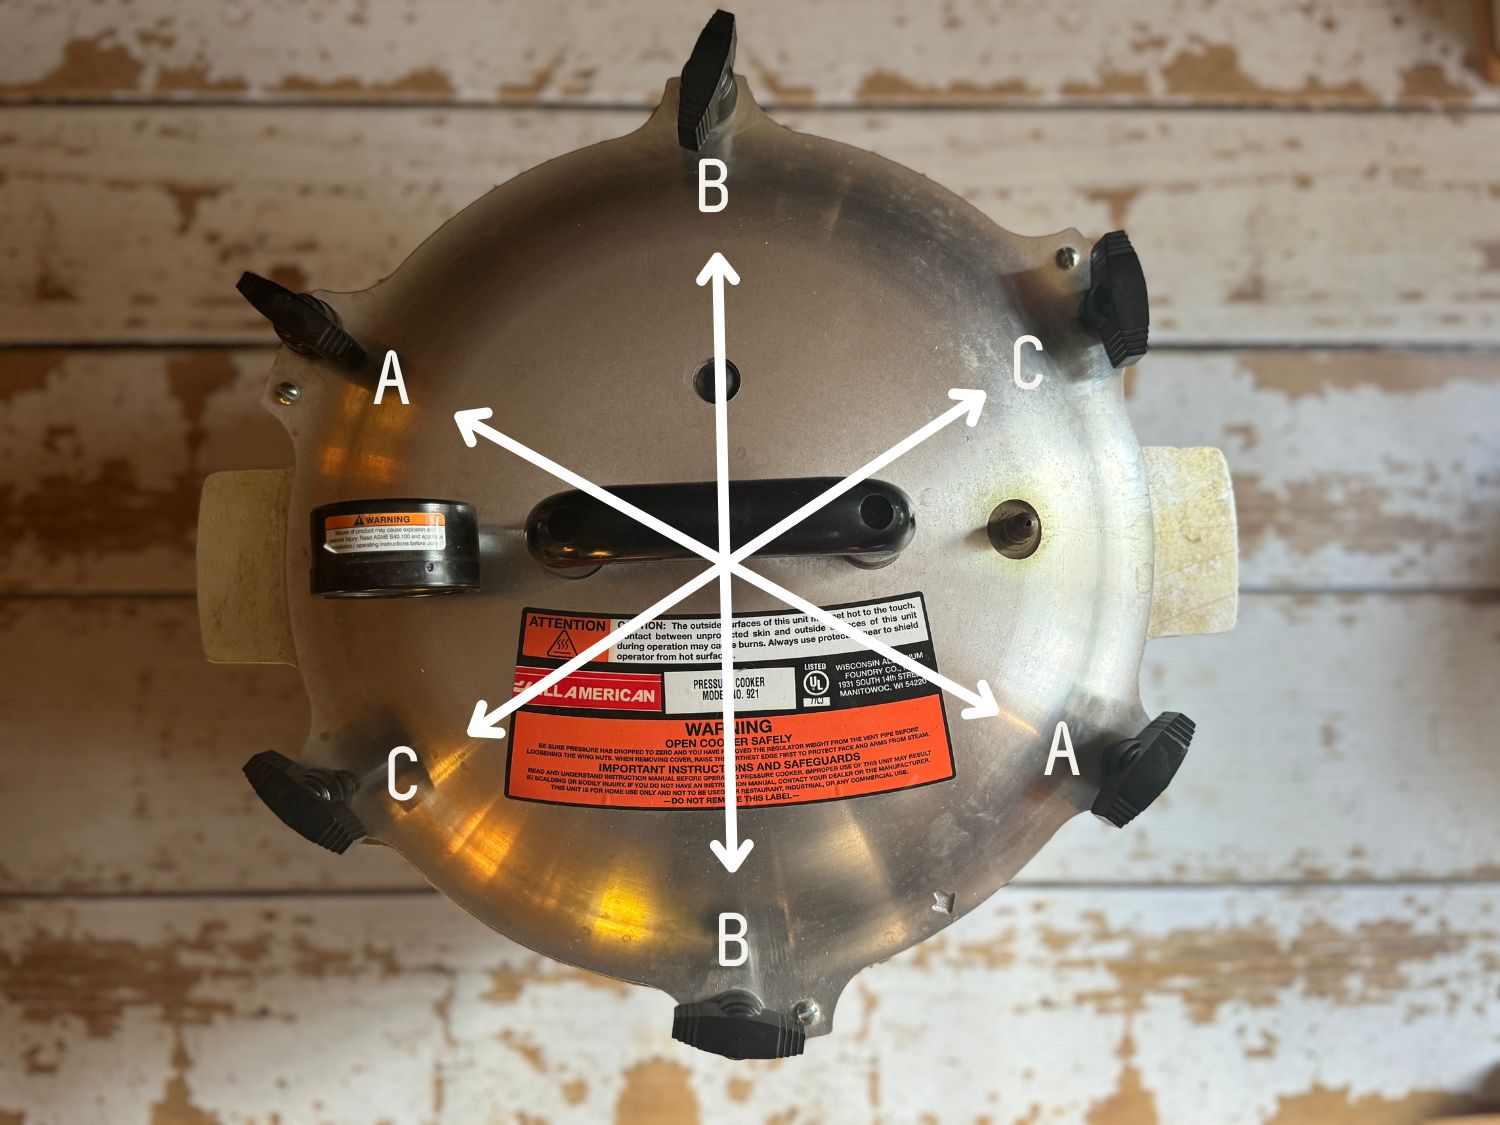 A diagram showing the order in which to tighten down the wingnuts on a pressure canner